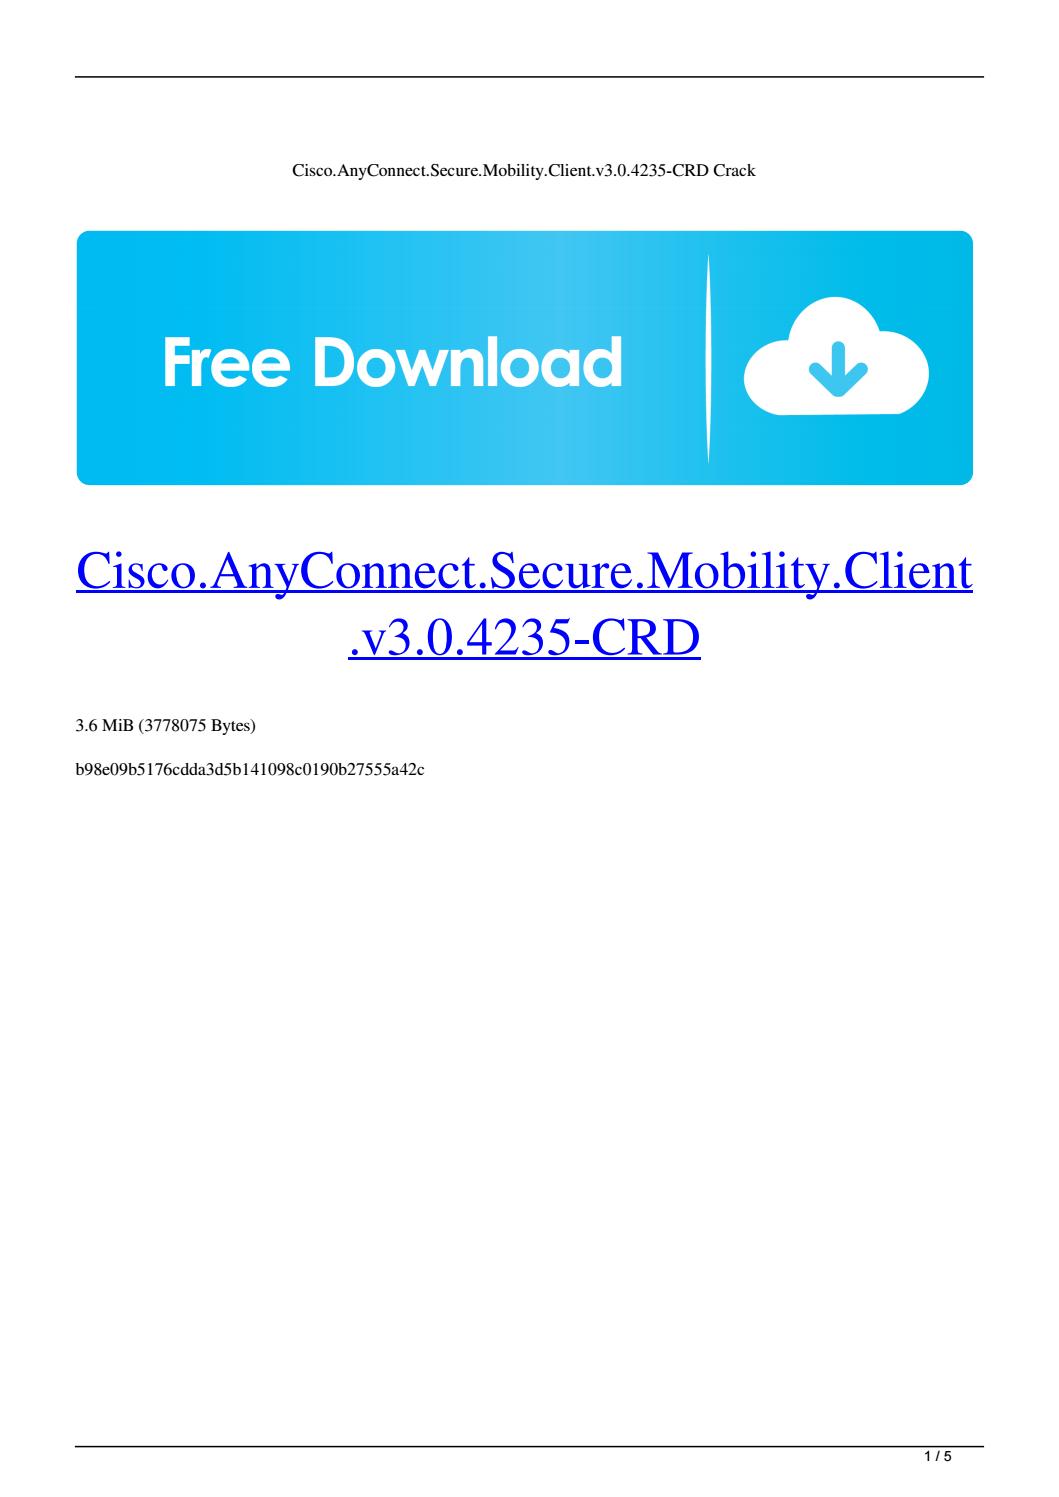 Cisco Anyconnect Secure Mobility Client Download For Windows Xp